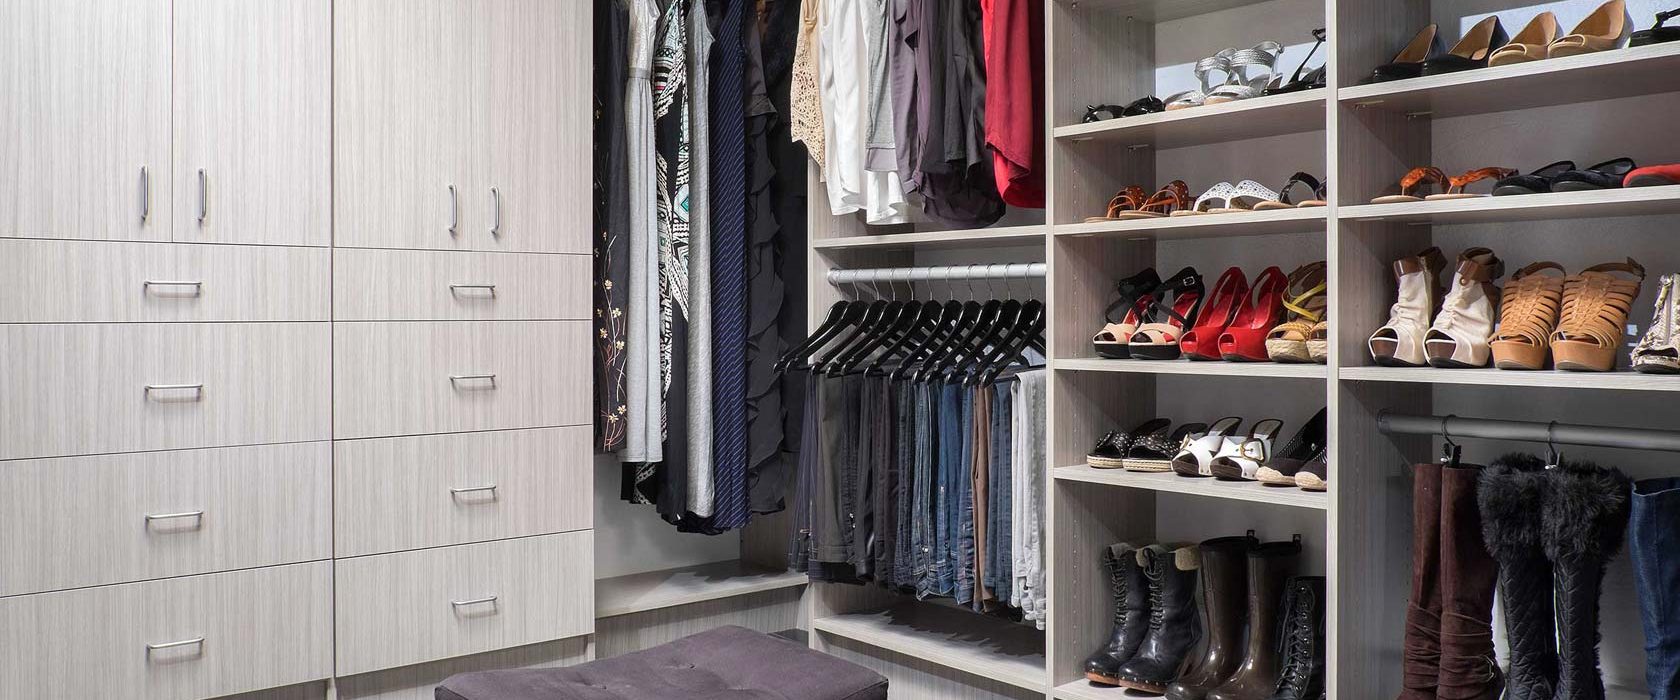 Custom Closet And Cabinets In Providence Ri Home Closet Systems